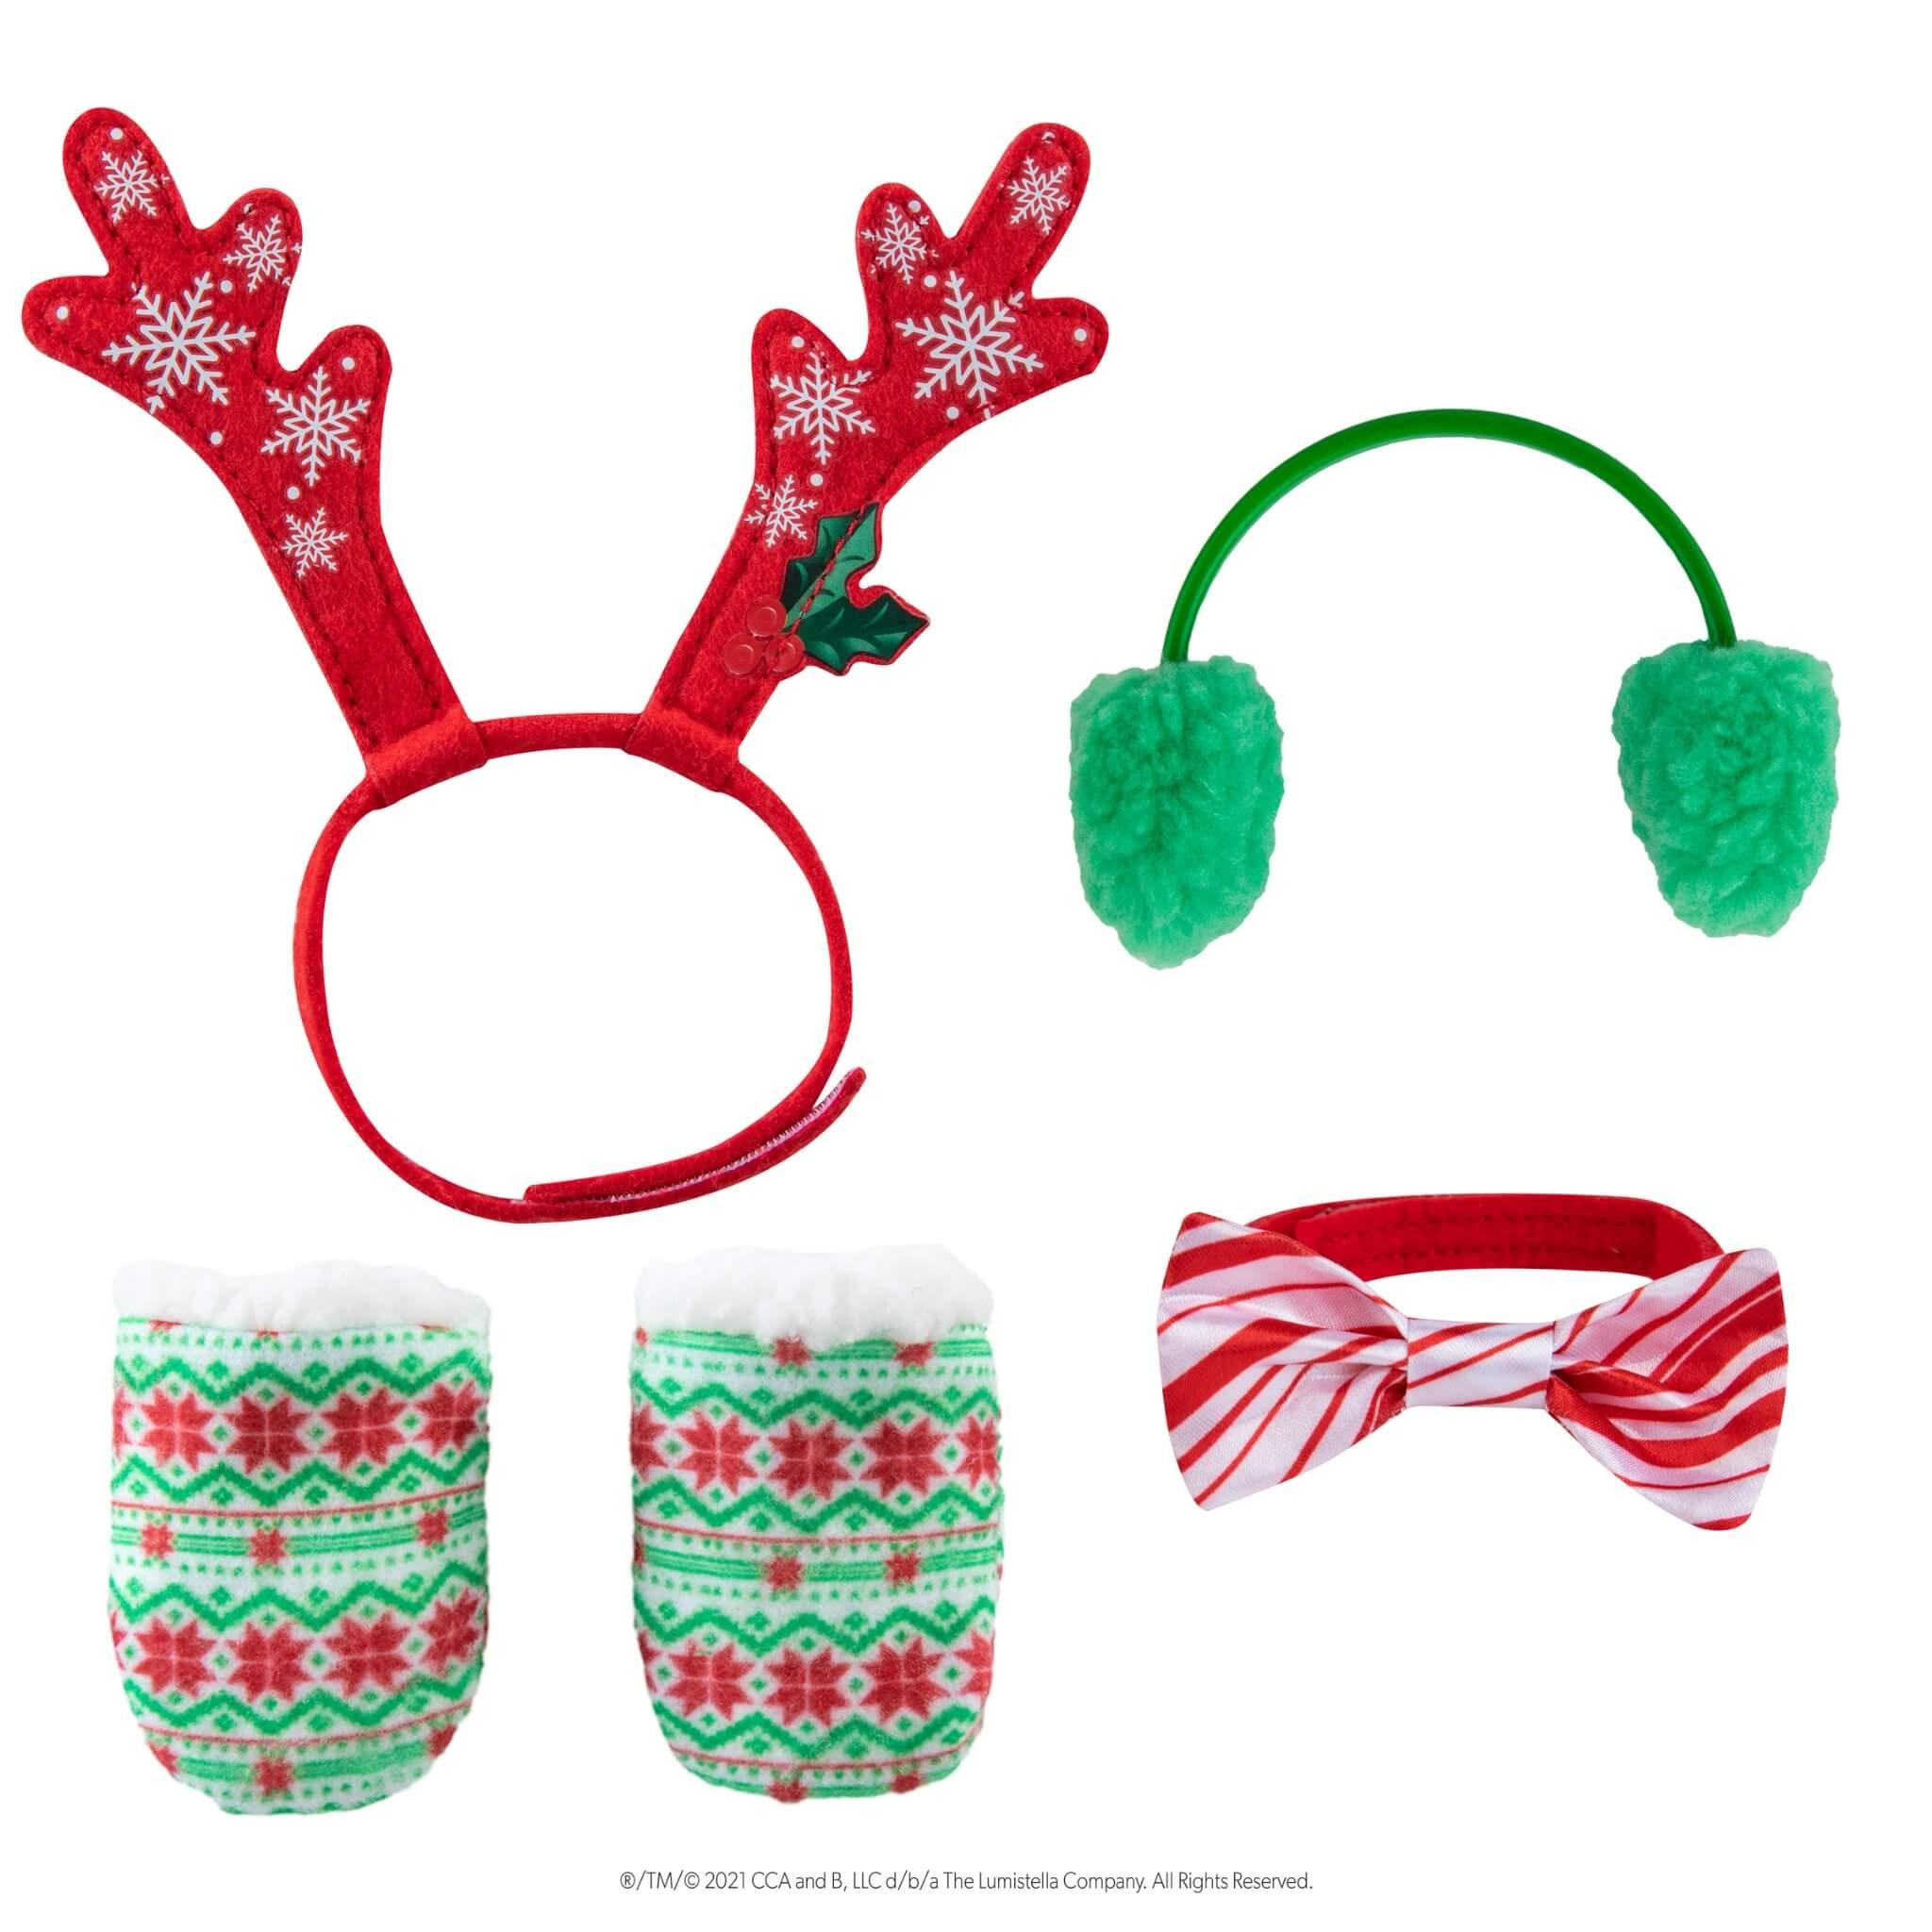 Claus Couture Collection® Dress-Up Party Pack - The Elf on The Shelf